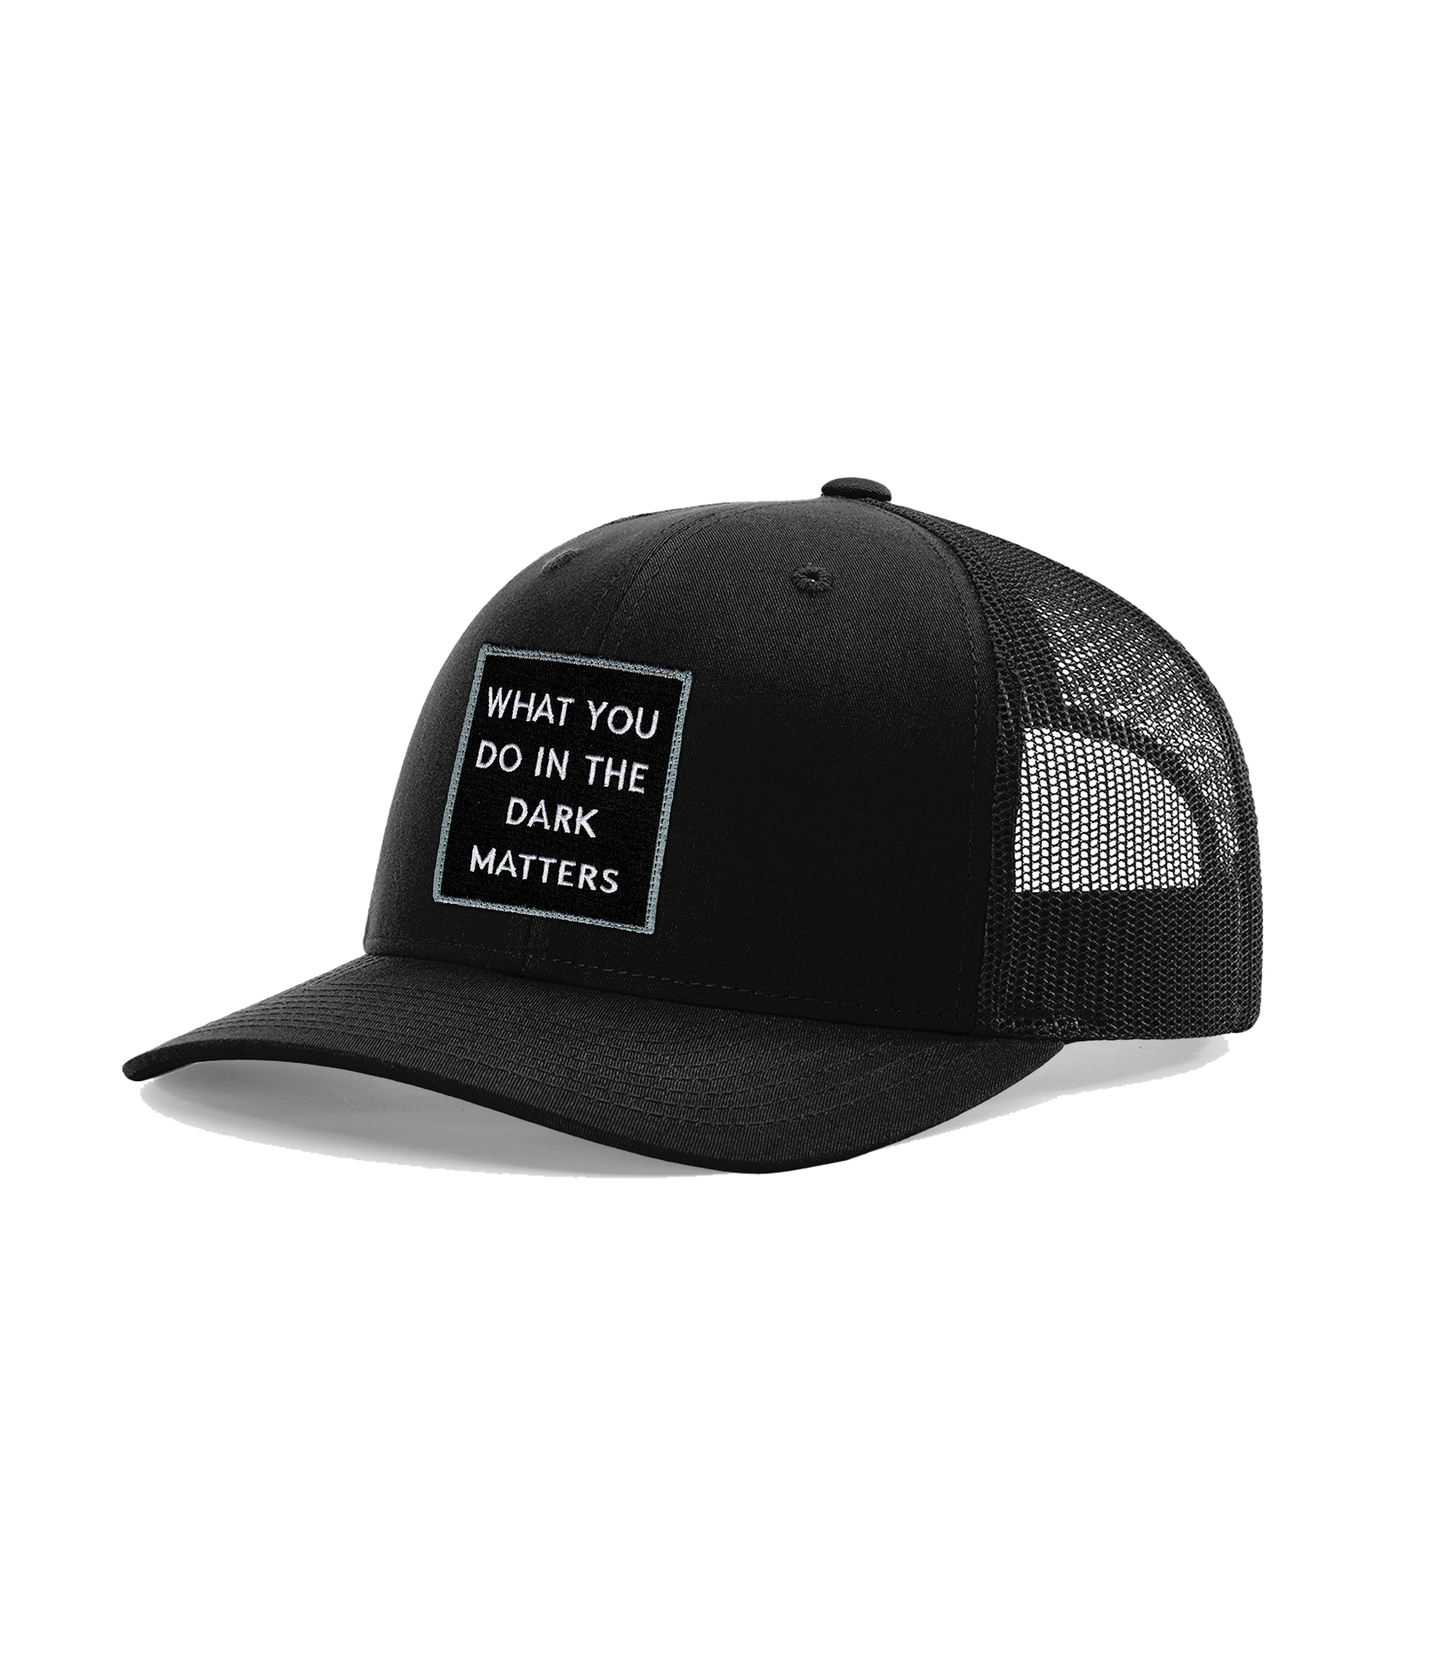 What You Do In The Dark "Black Collection" Premium Hat